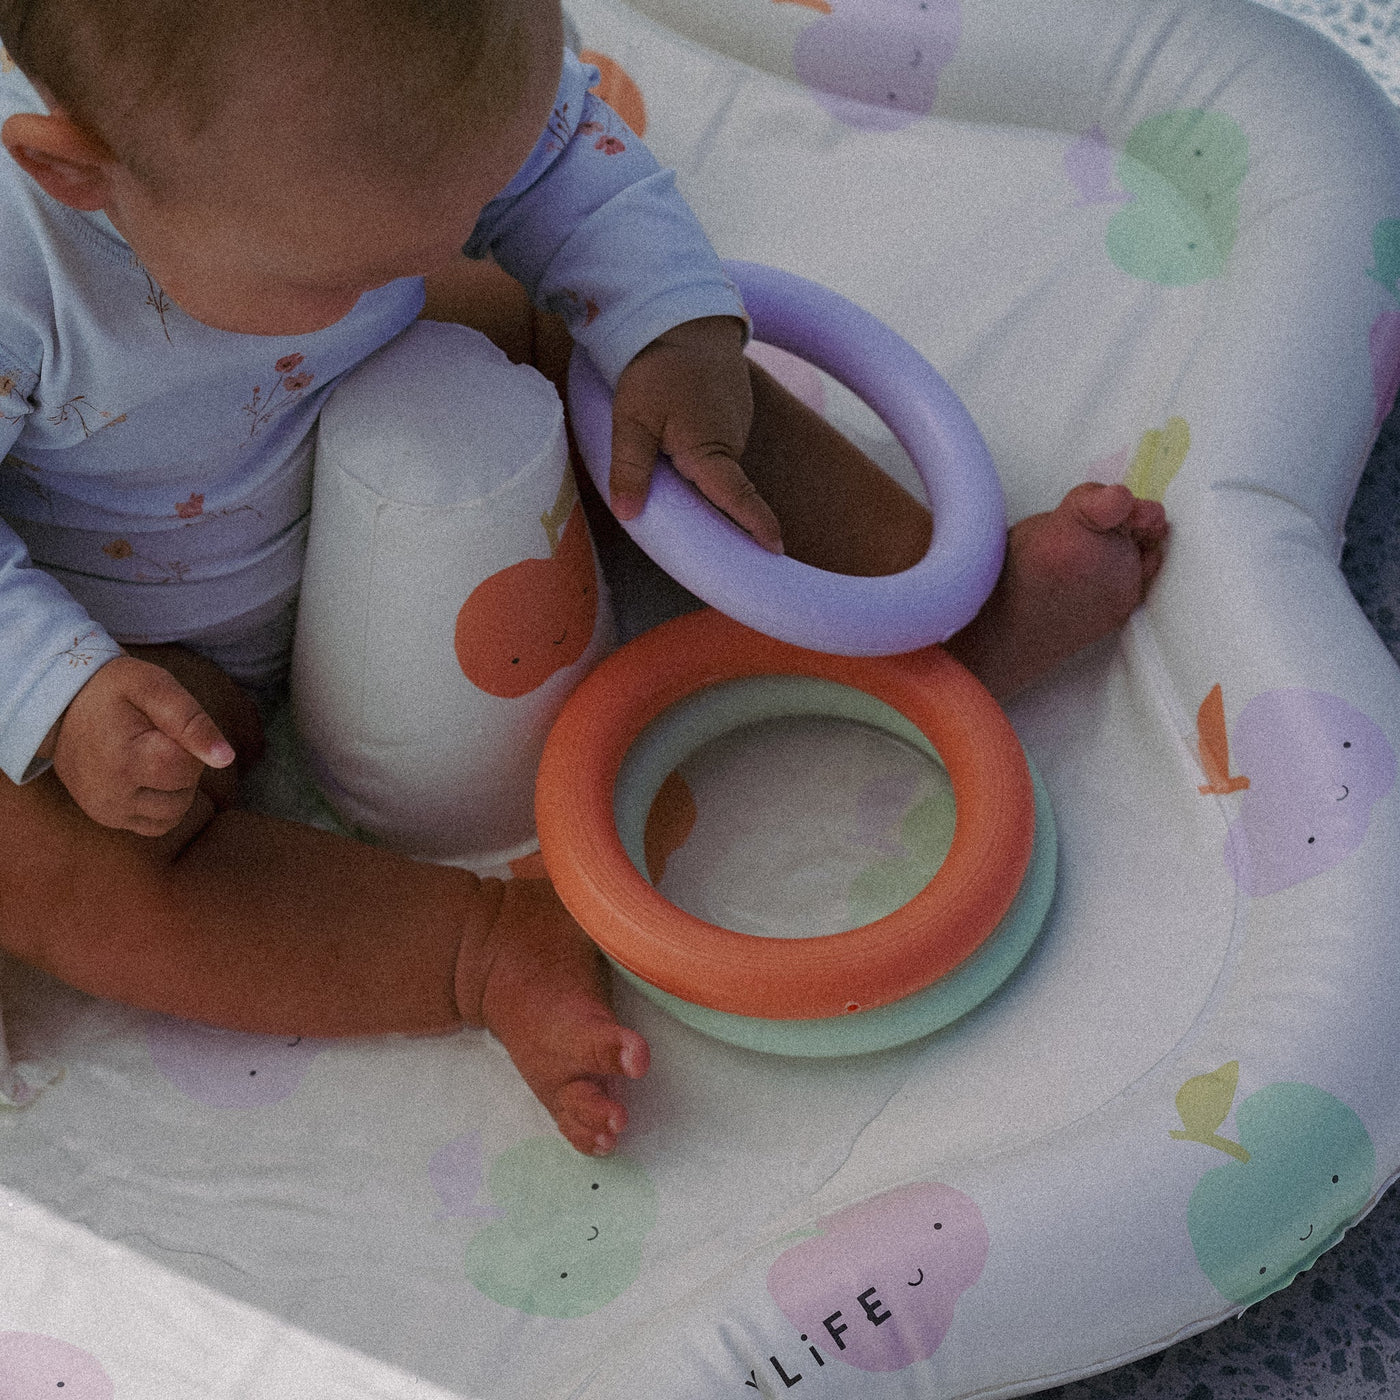 Baby Playmat with Shade